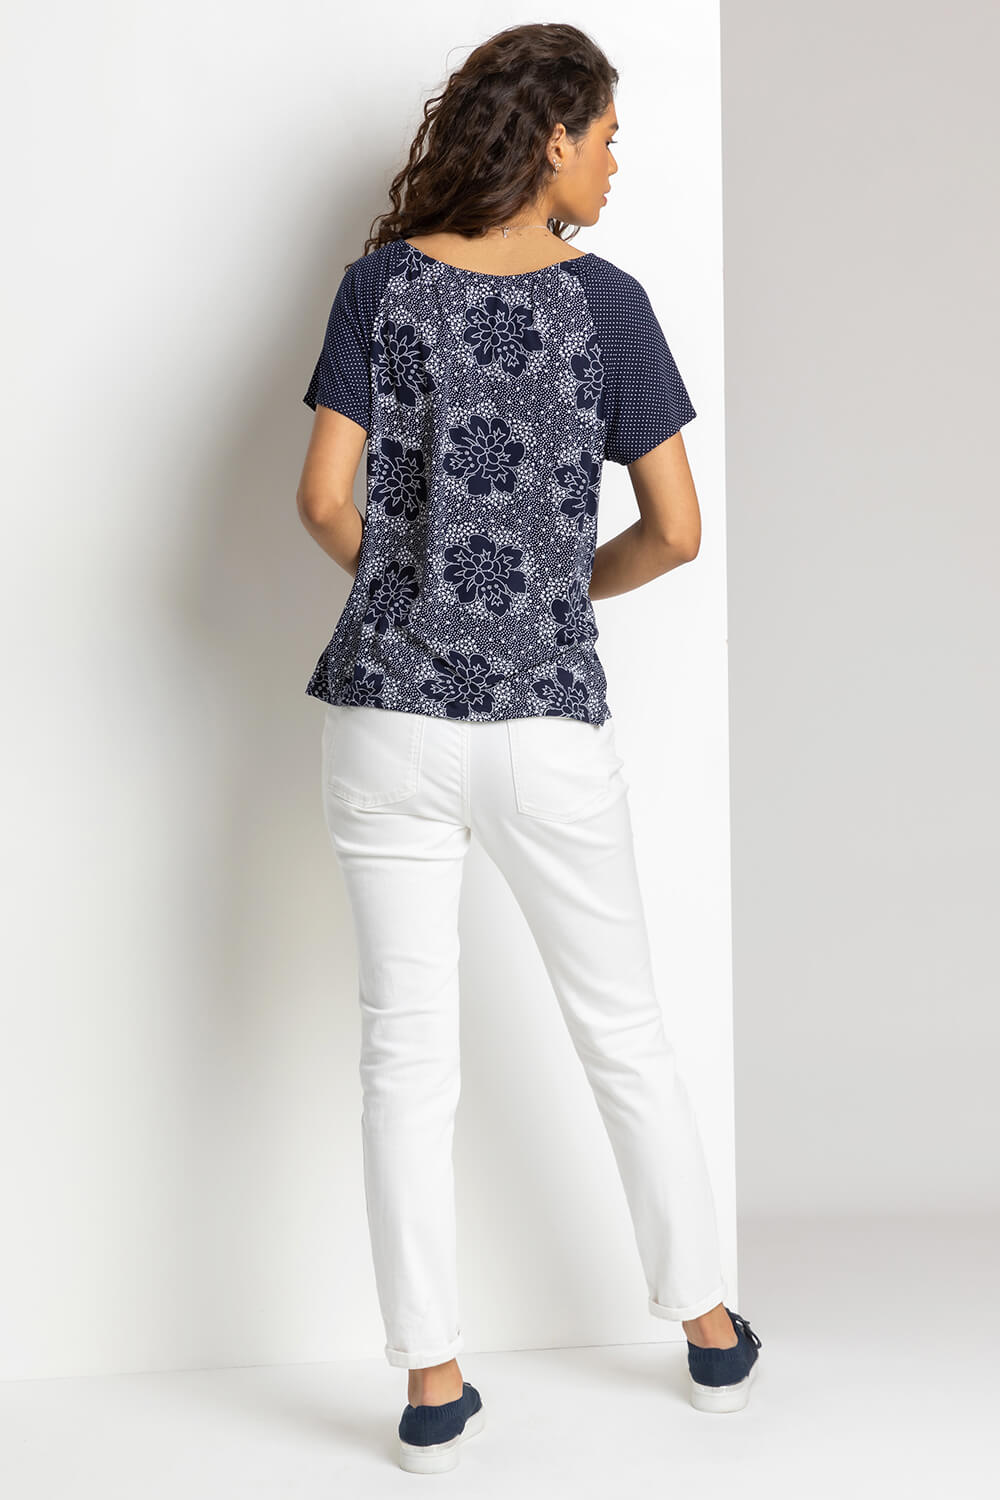 Navy  Mixed Floral Spot Print Tassel Top, Image 2 of 4